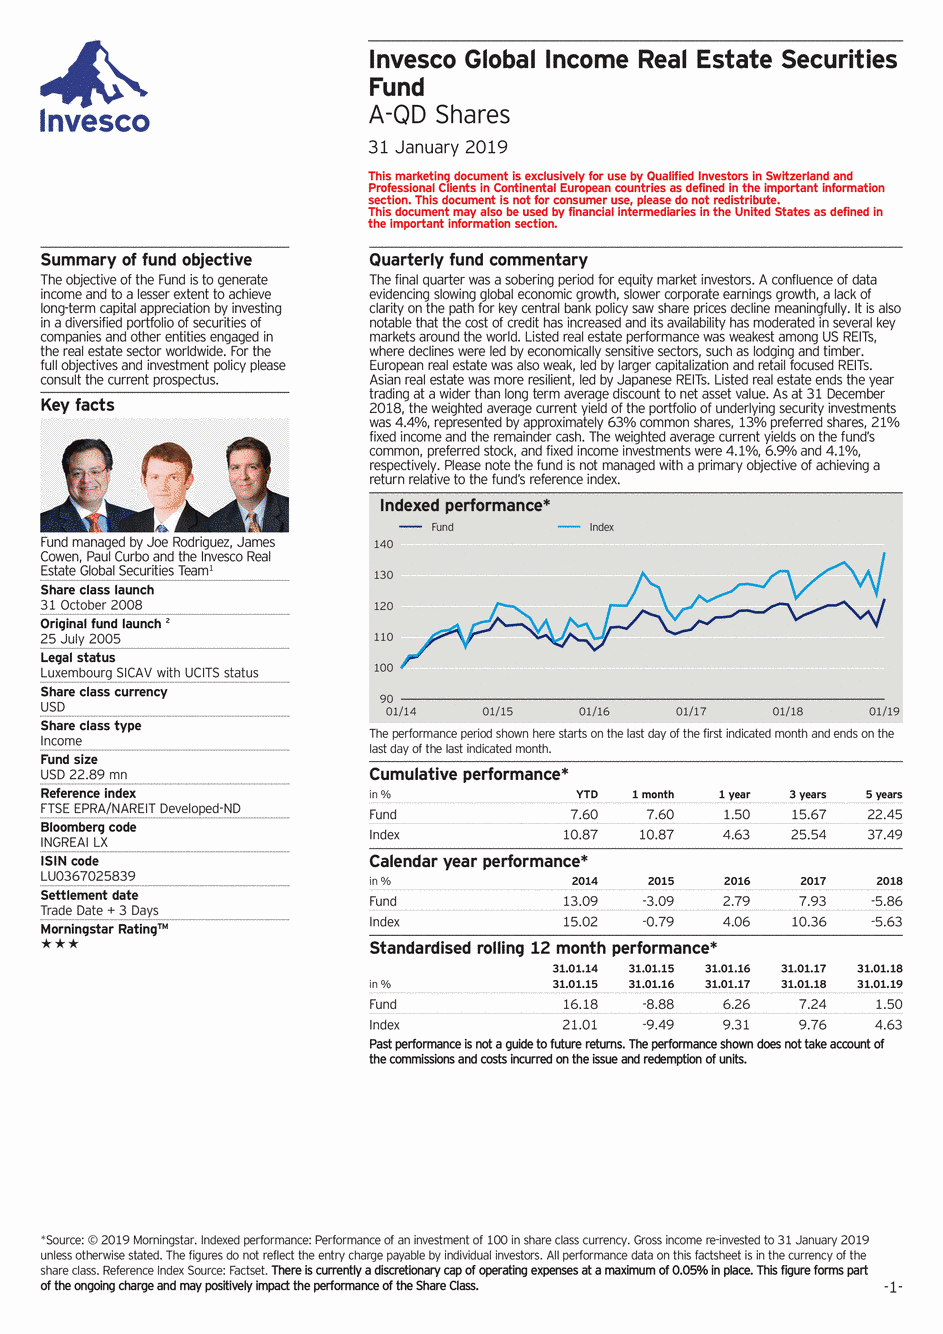 Reporting Invesco Funds SICAV - Global Inc. Real Estate Securit. Fund - A - 31/01/2019 - Anglais